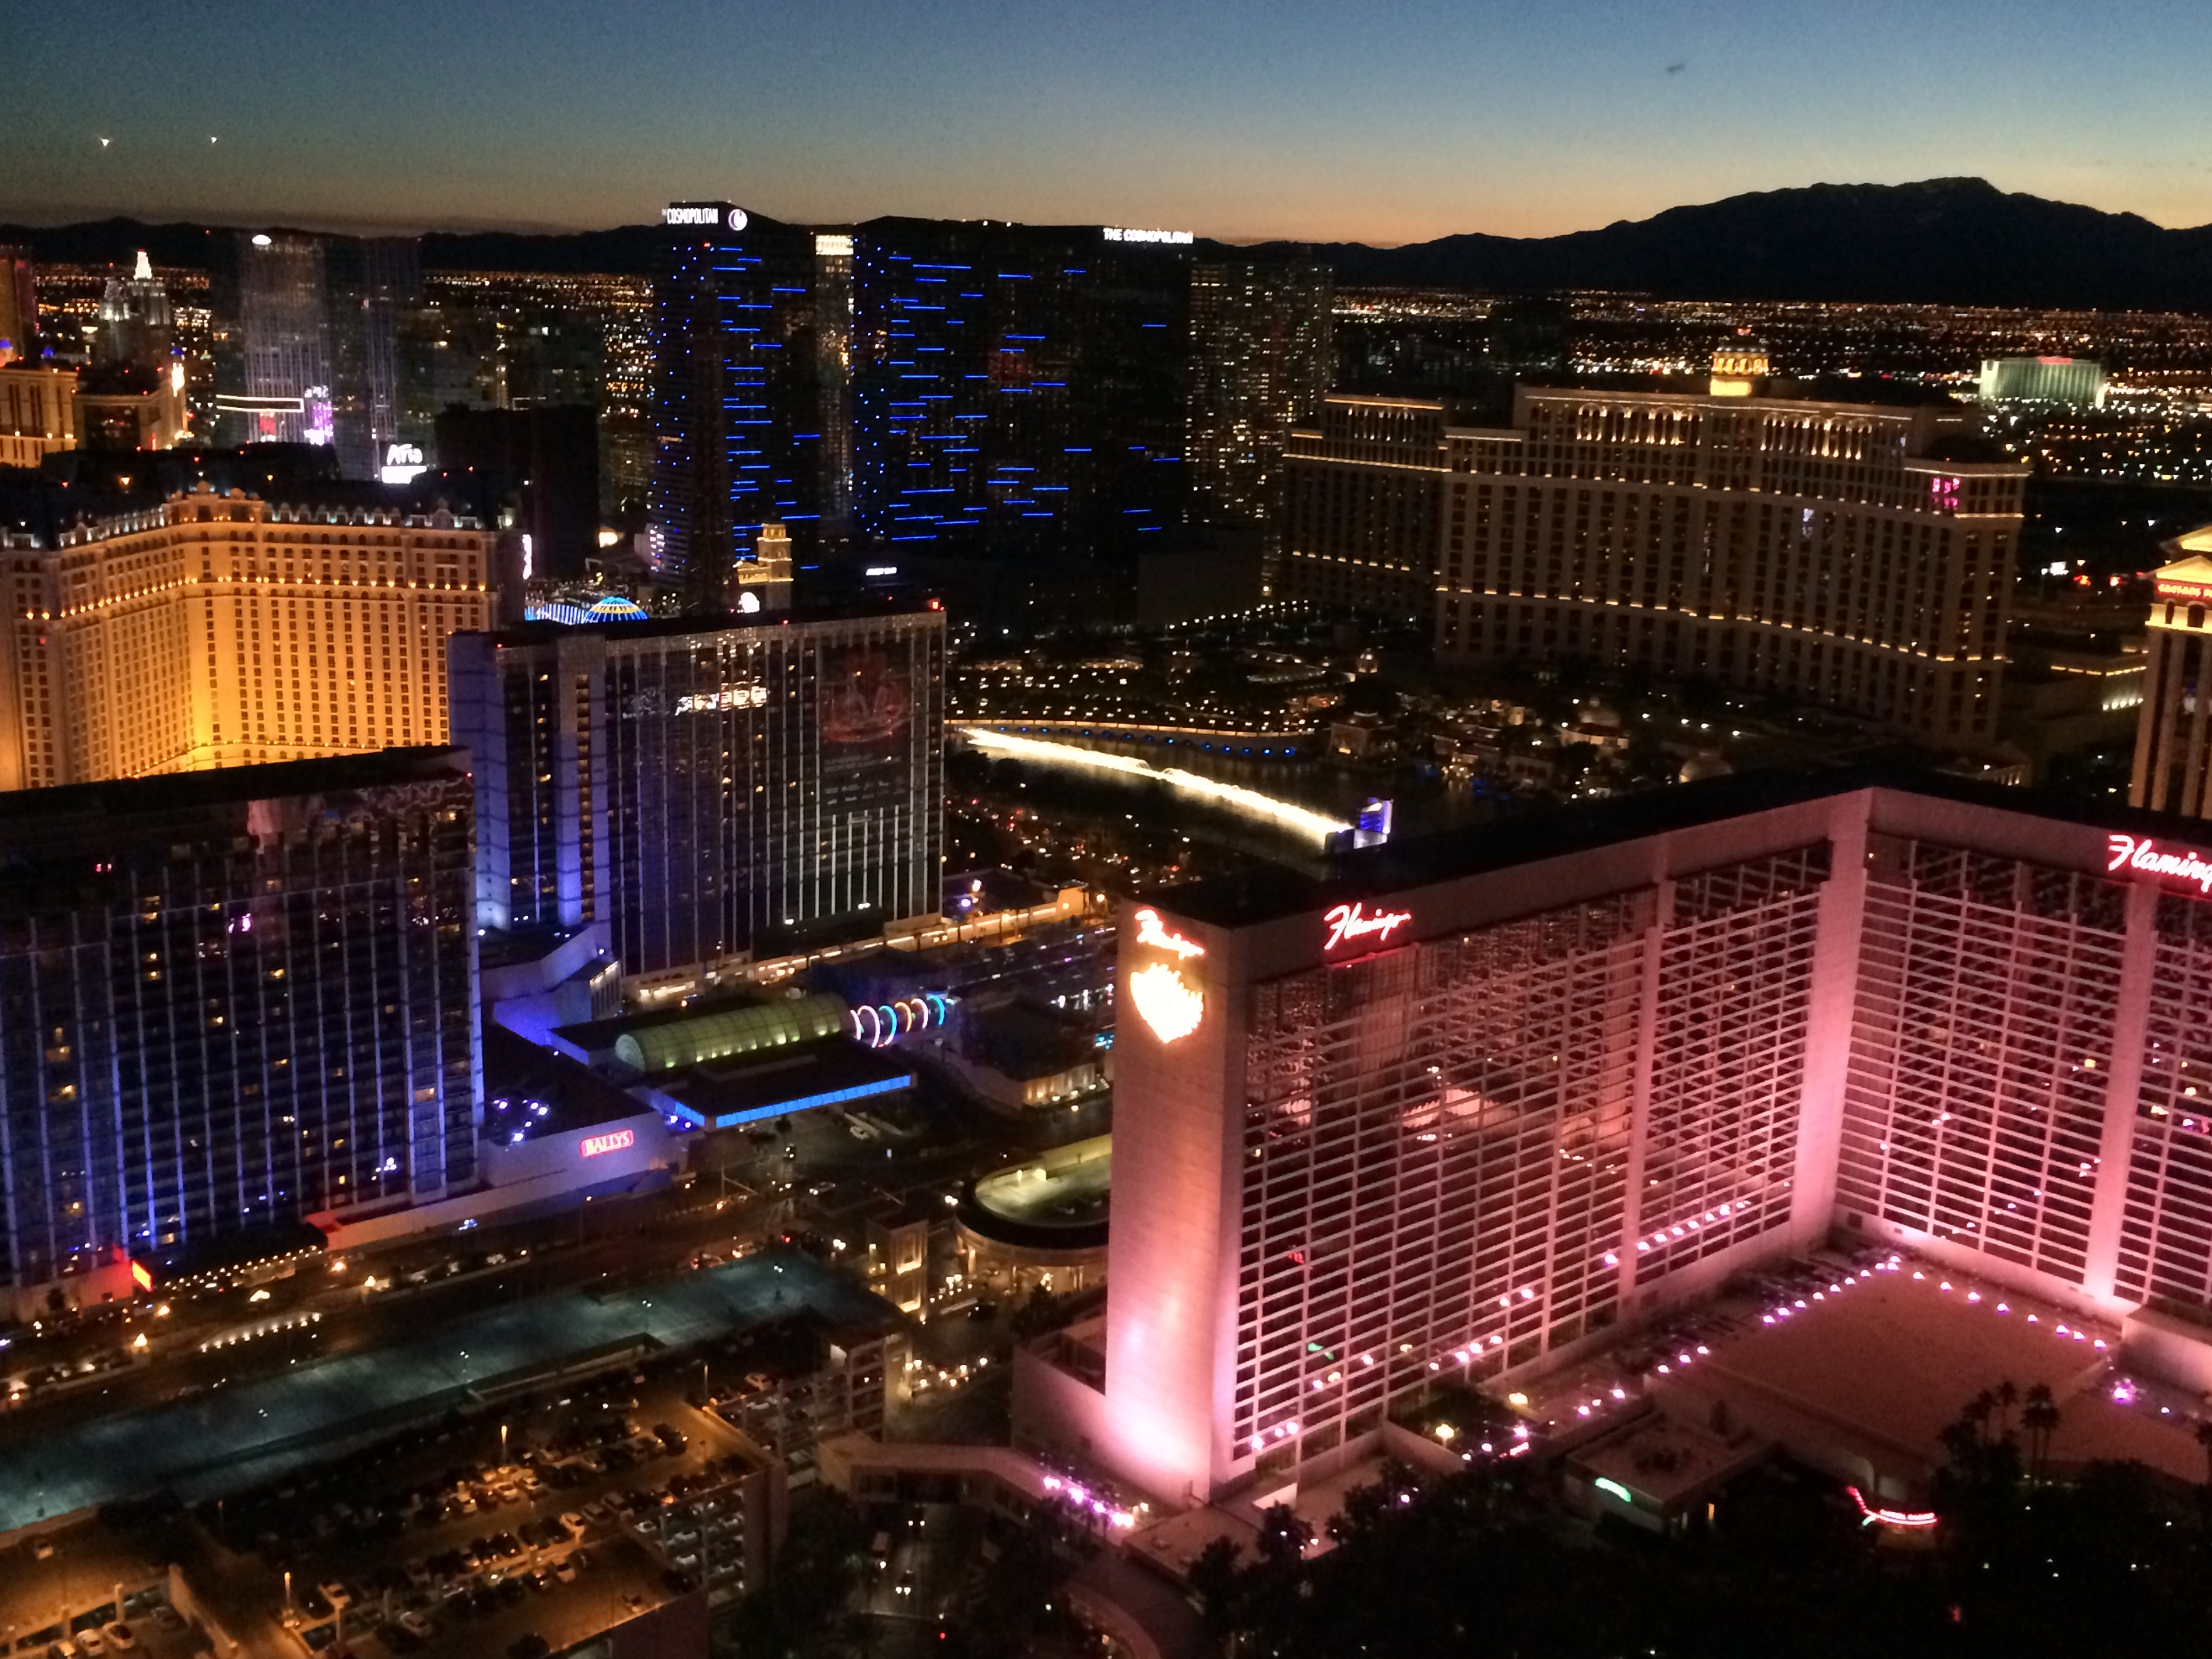 The bright white strip in the middle of the picture is the Bellagio Fountain - perfect timing!